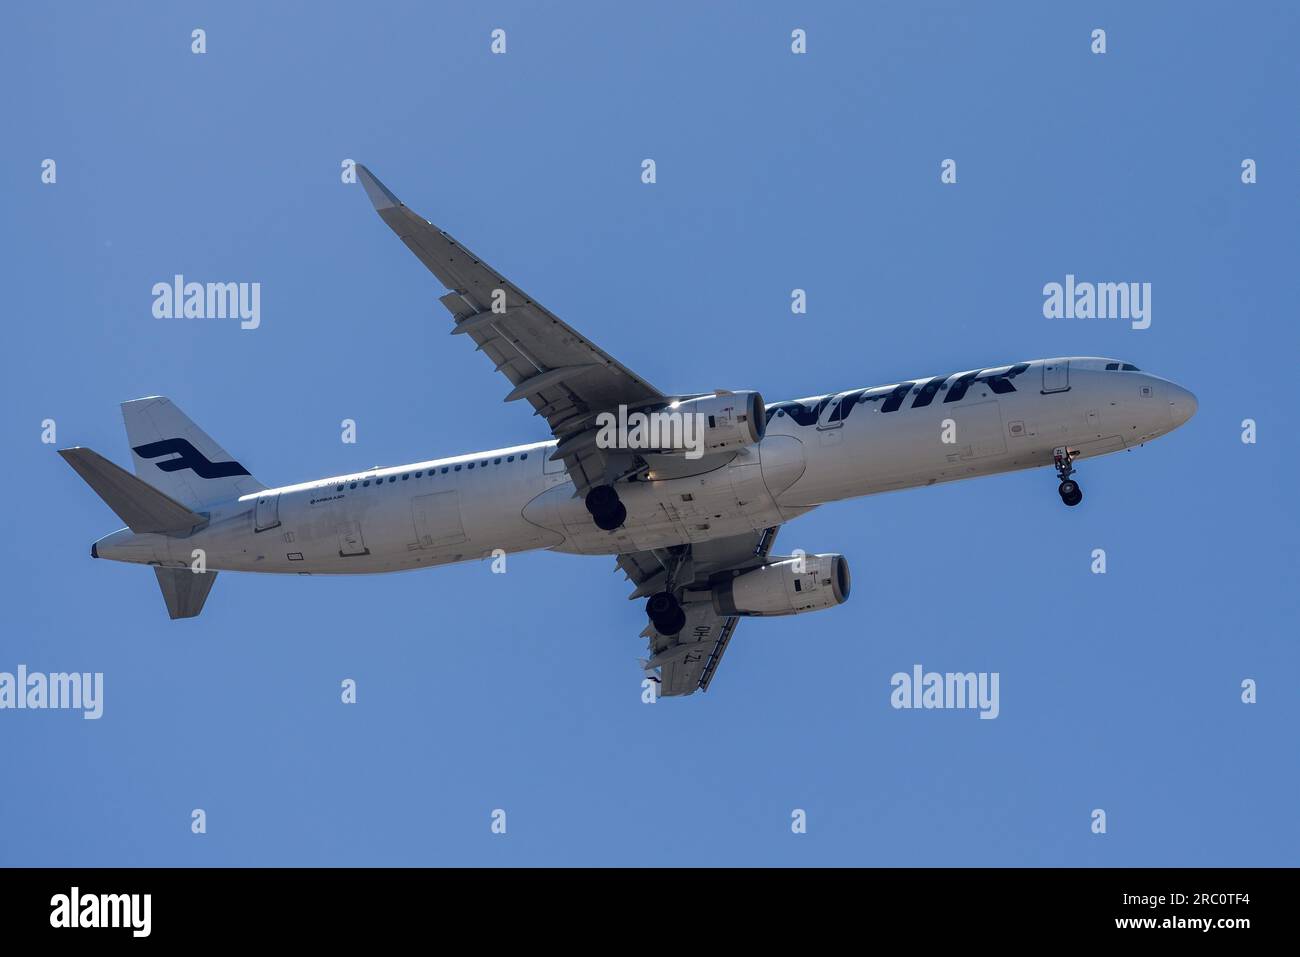 Lisbon, Portugal - July 12, 2023: Finnish Airways with aircraft Airbus A321 approaching to land at Lisbon International Airport against blue sky Stock Photo